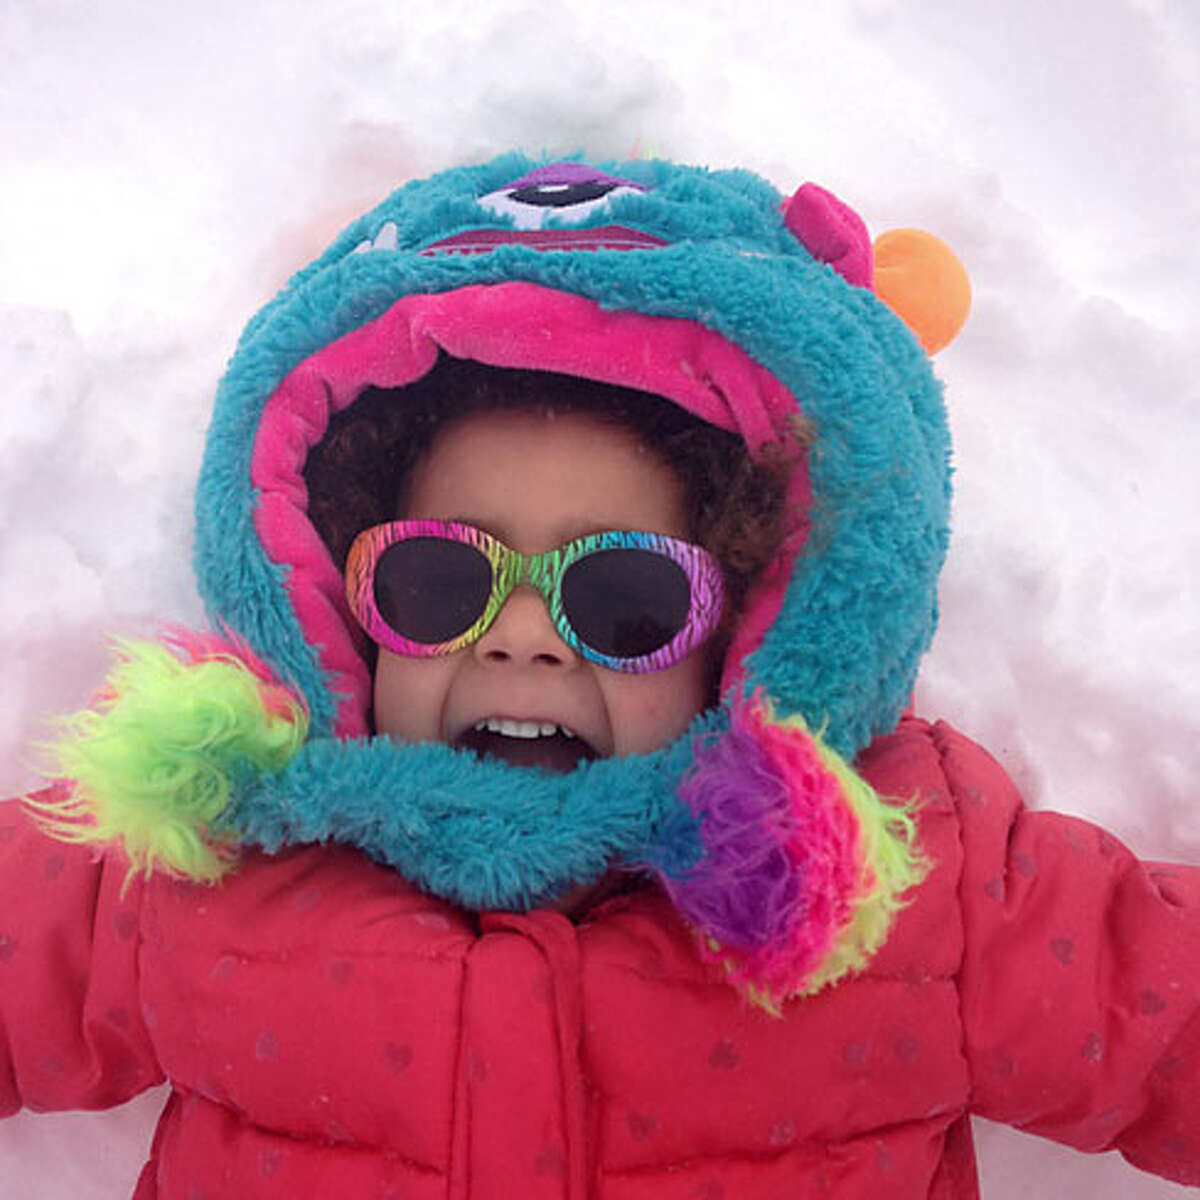 Marley Gipson, 3, brightens up the snow.